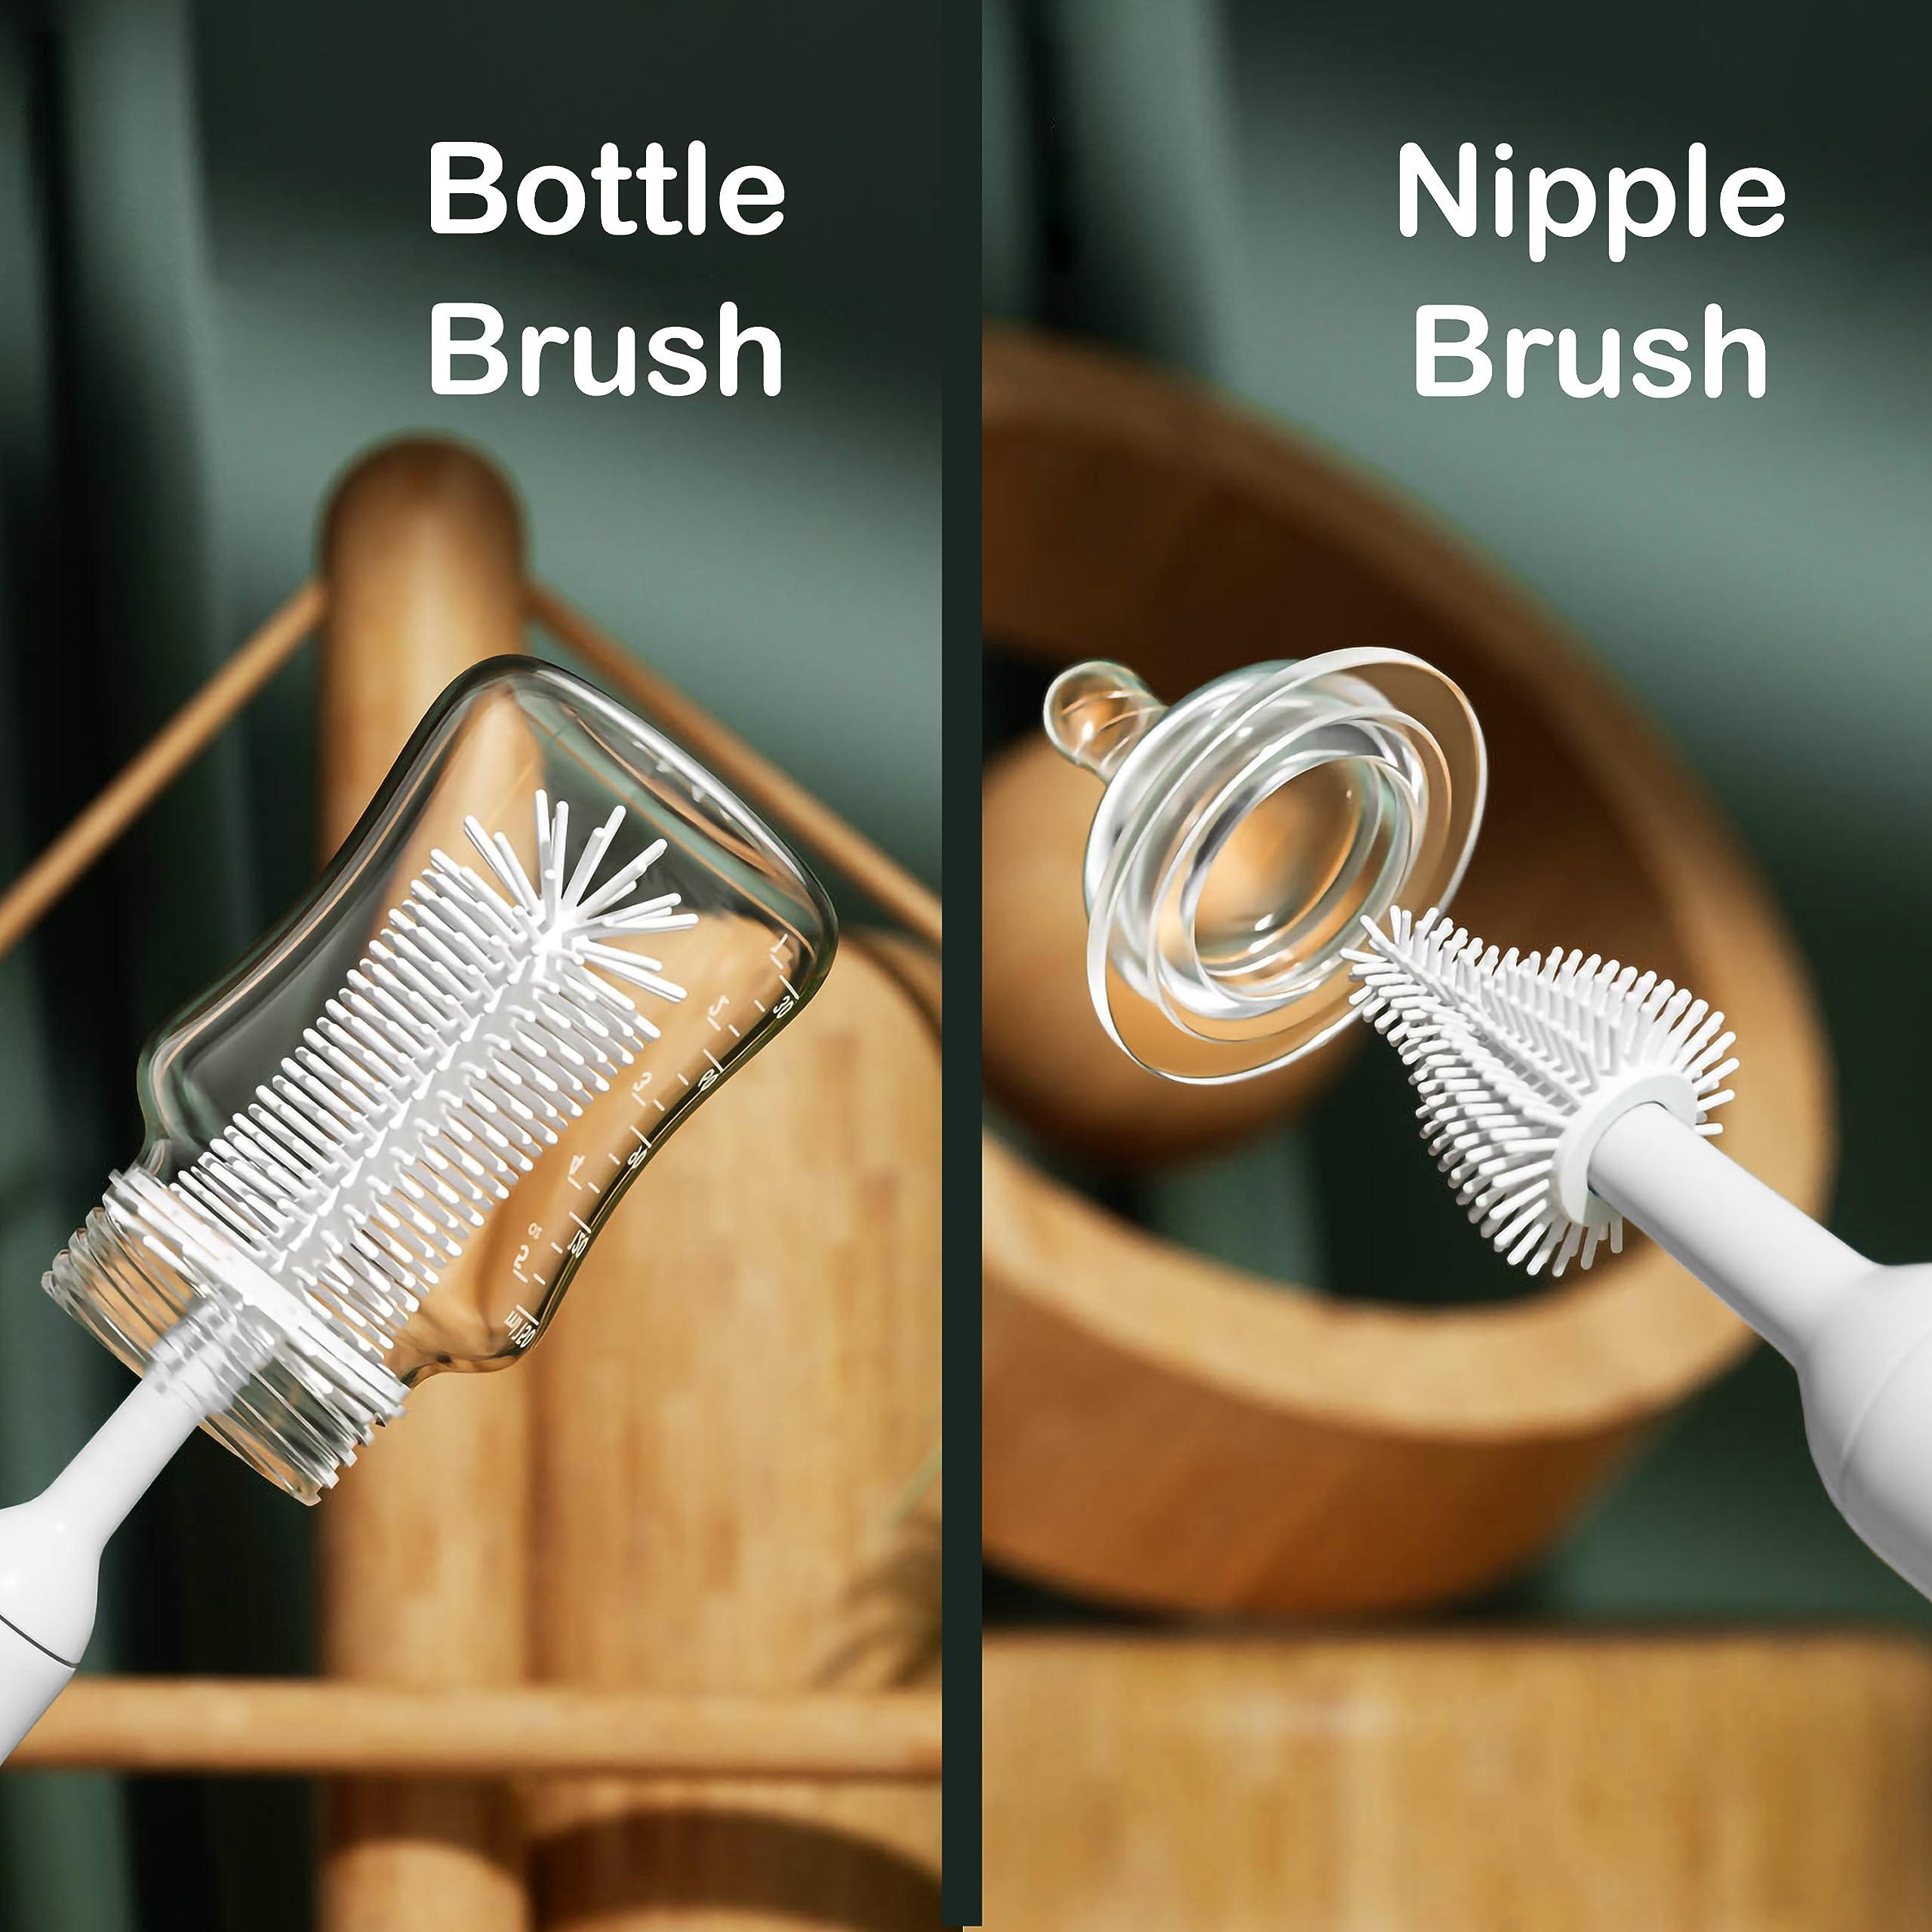 Electric Bottle Cleaner Brush for Baby Bottles - Electric Bottle Brush Cleaner, Baby Bottle Washer with Nipple Brush and Straw Cleaner Brush - Take Care of Your Family with Electric Baby Bottle Brush